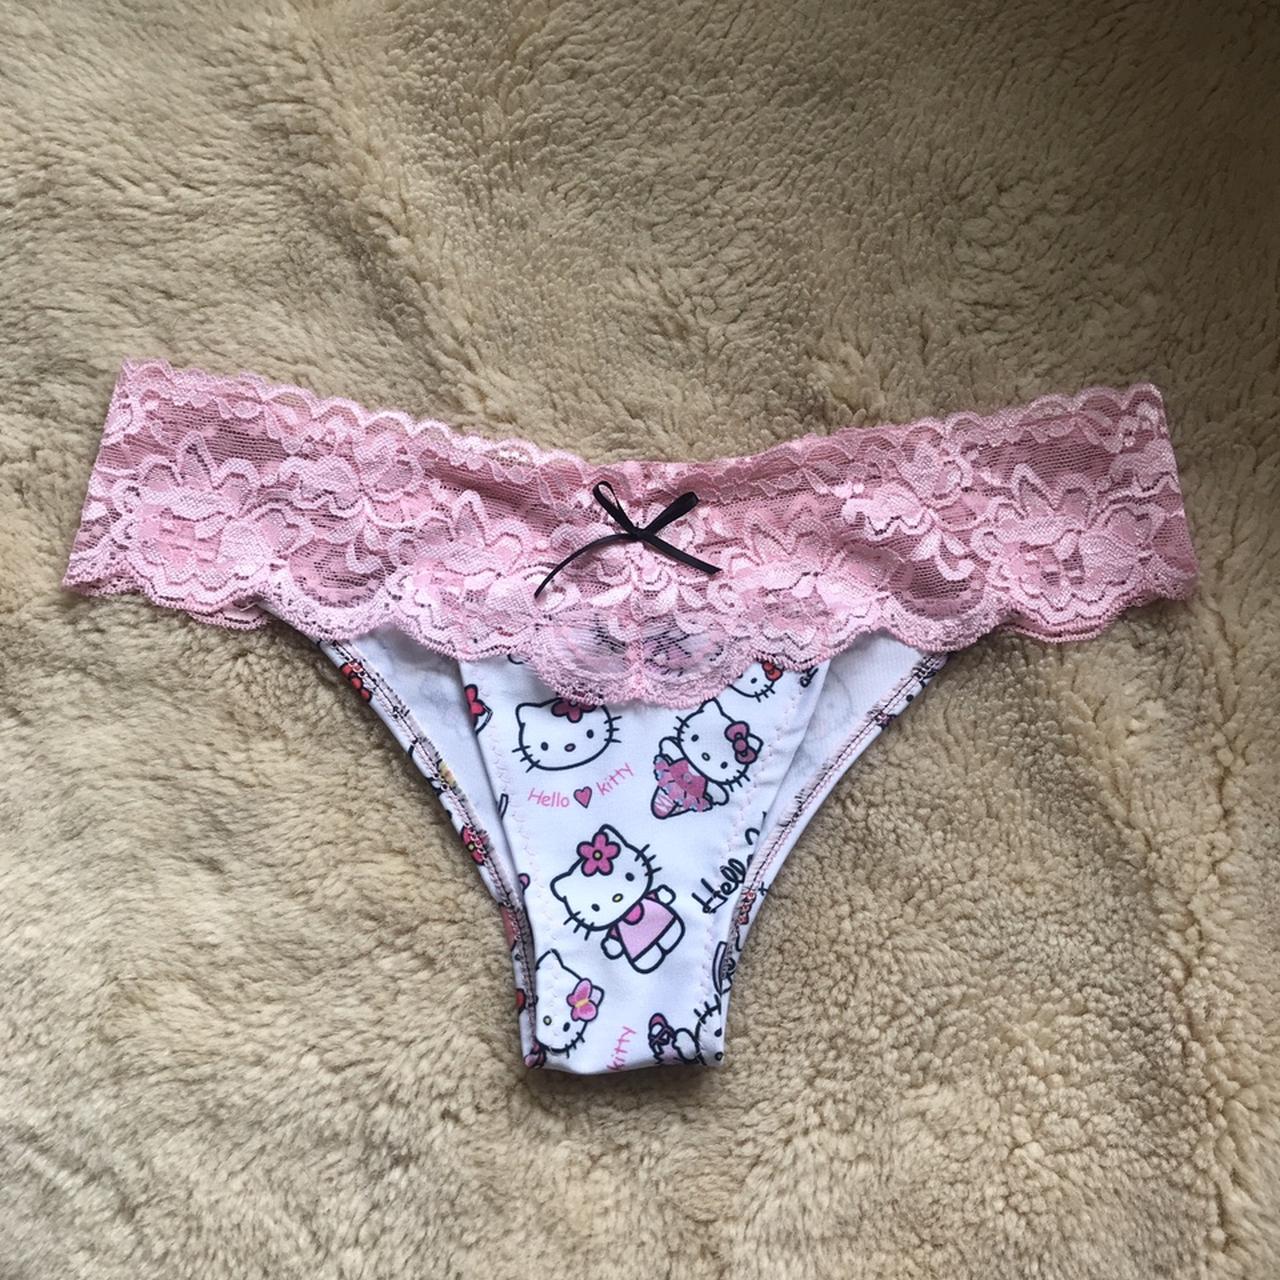 Sexy underwear made with Hello Kitty fabric and pink